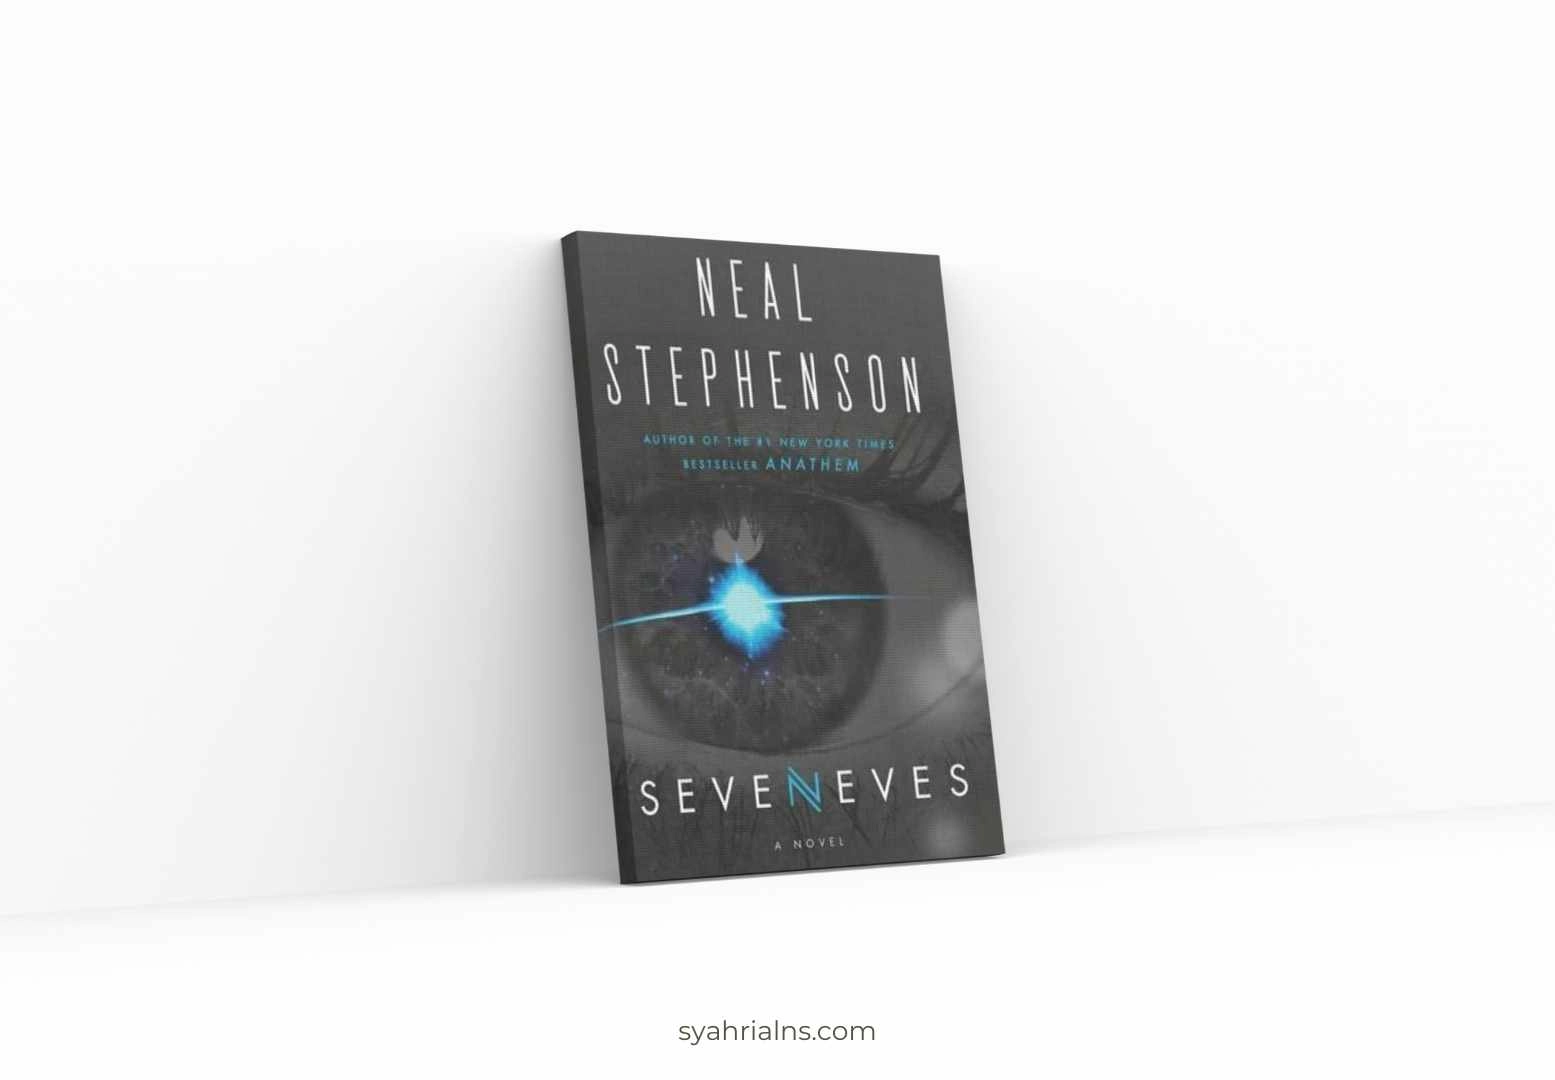 seveneves book cover